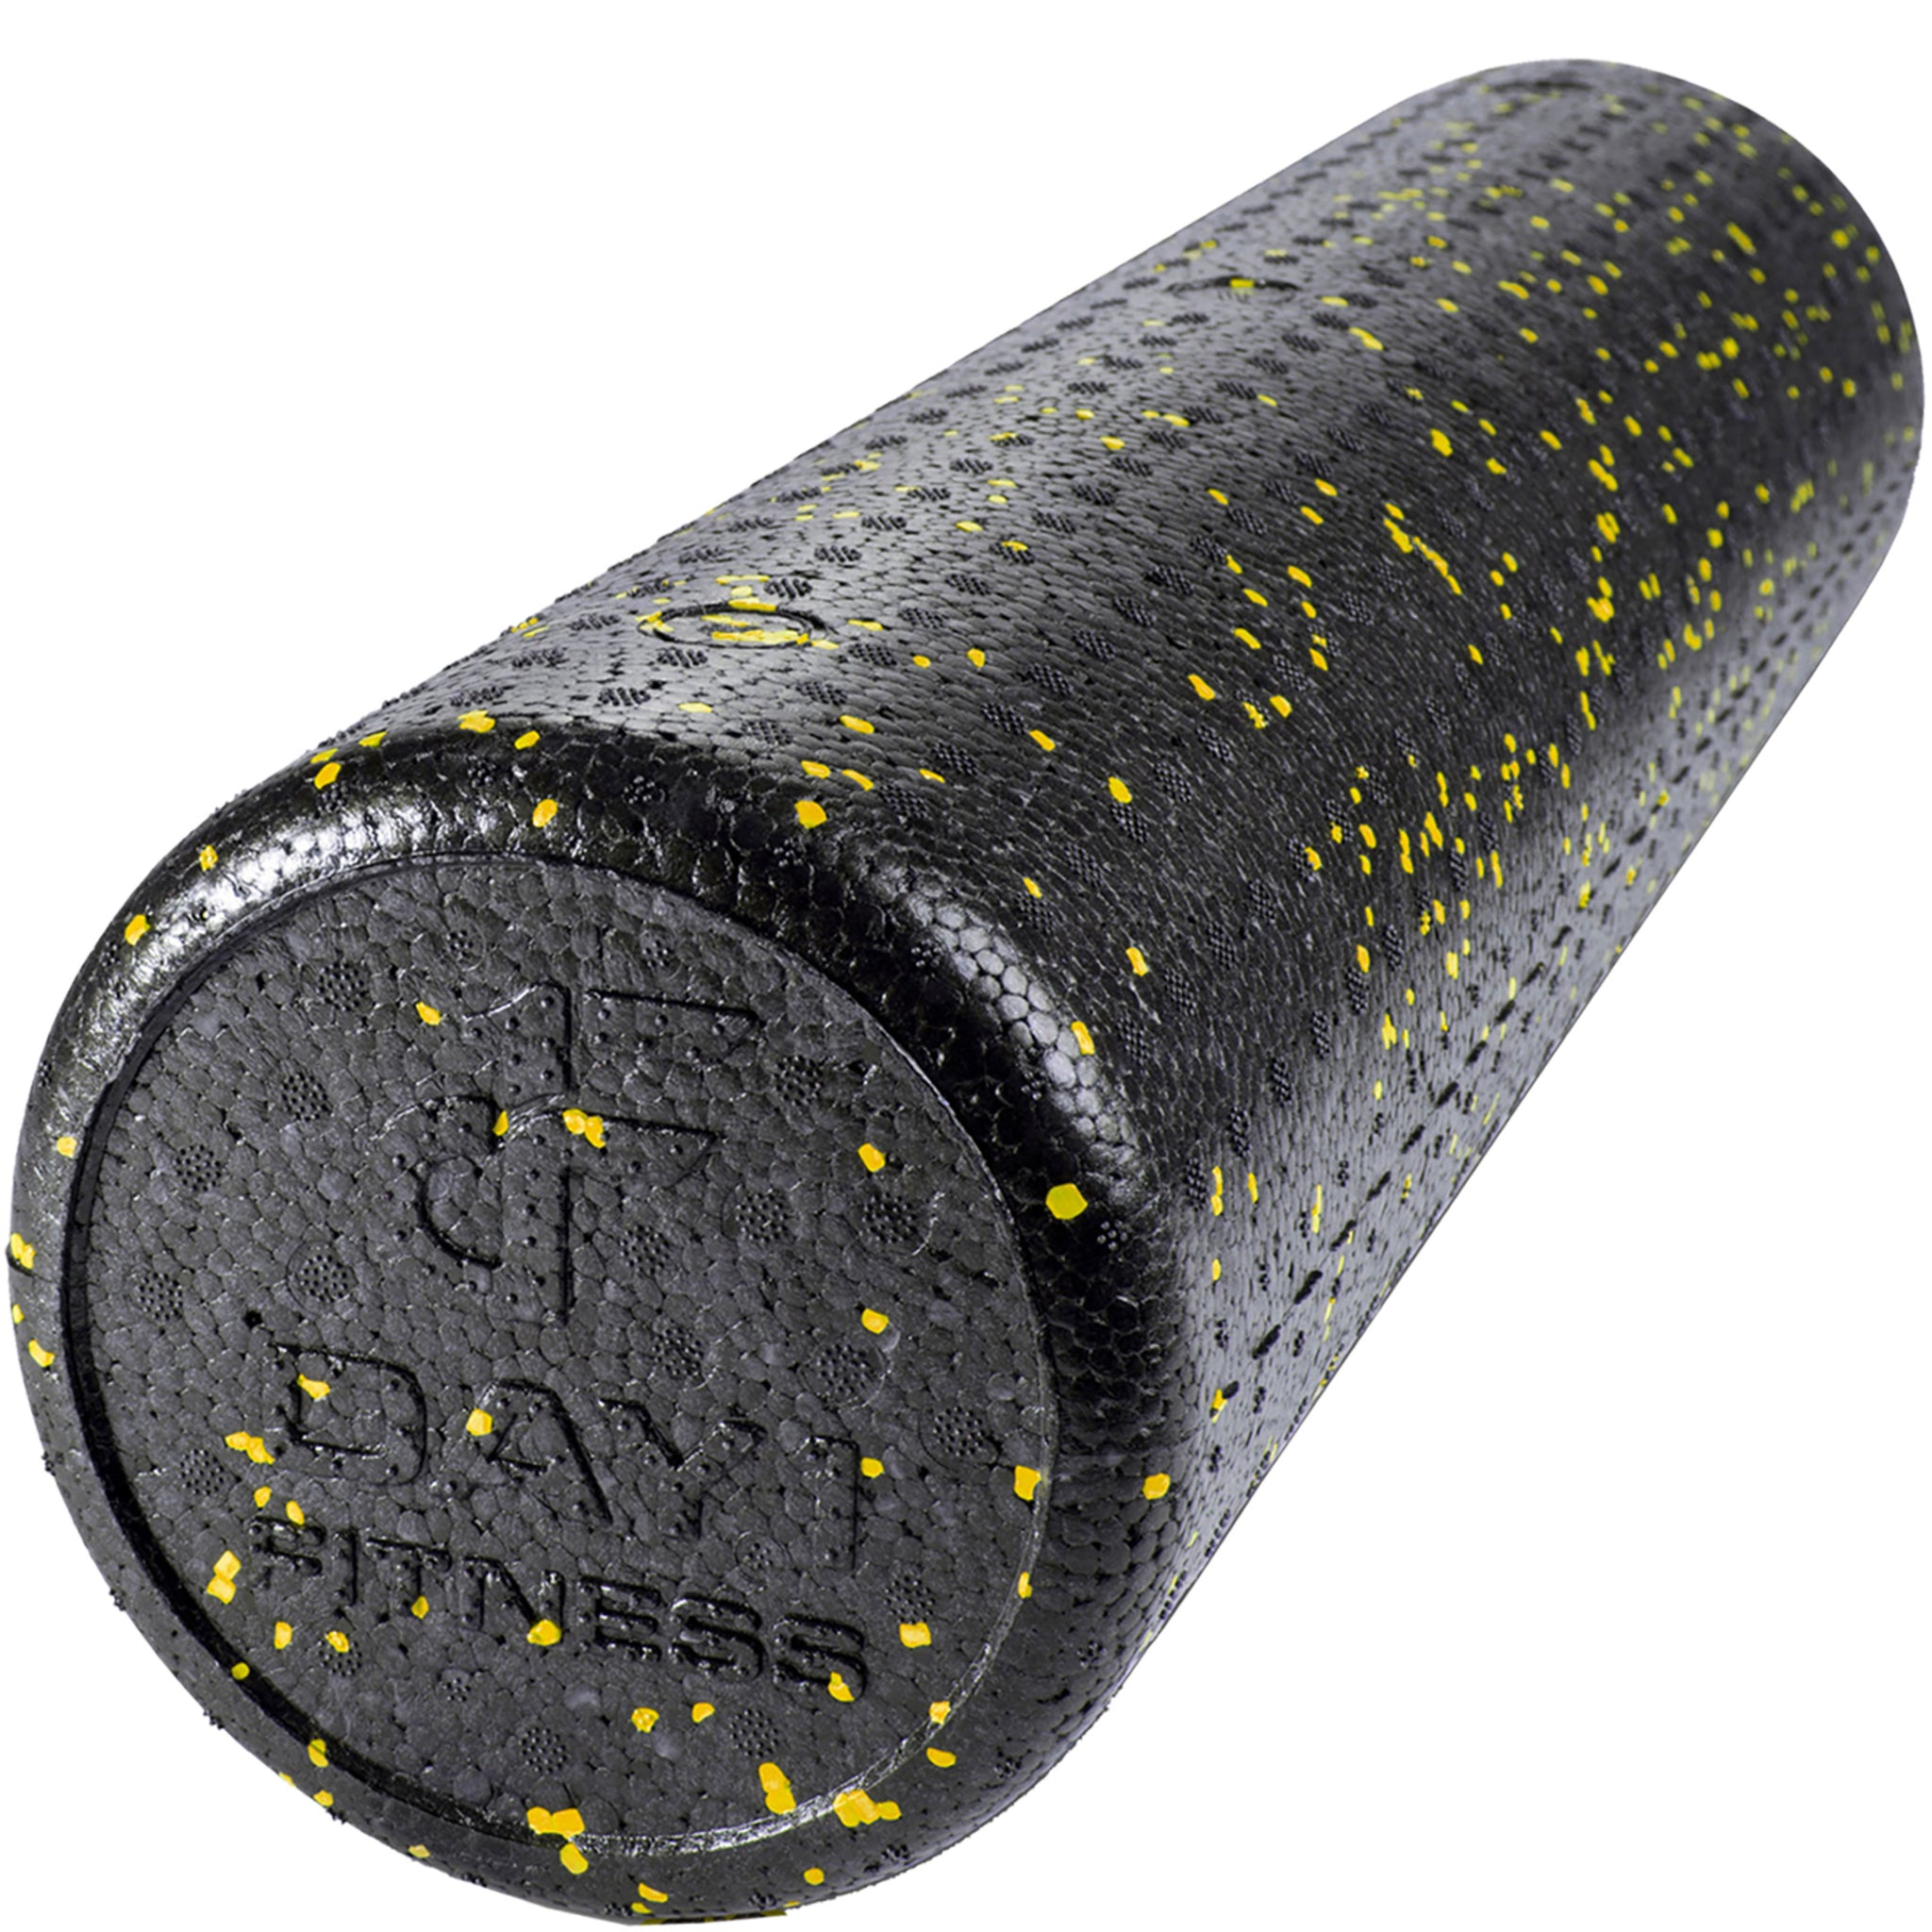 High-Density Foam Roller 24" Speckled Yellow Day 1 Fitness